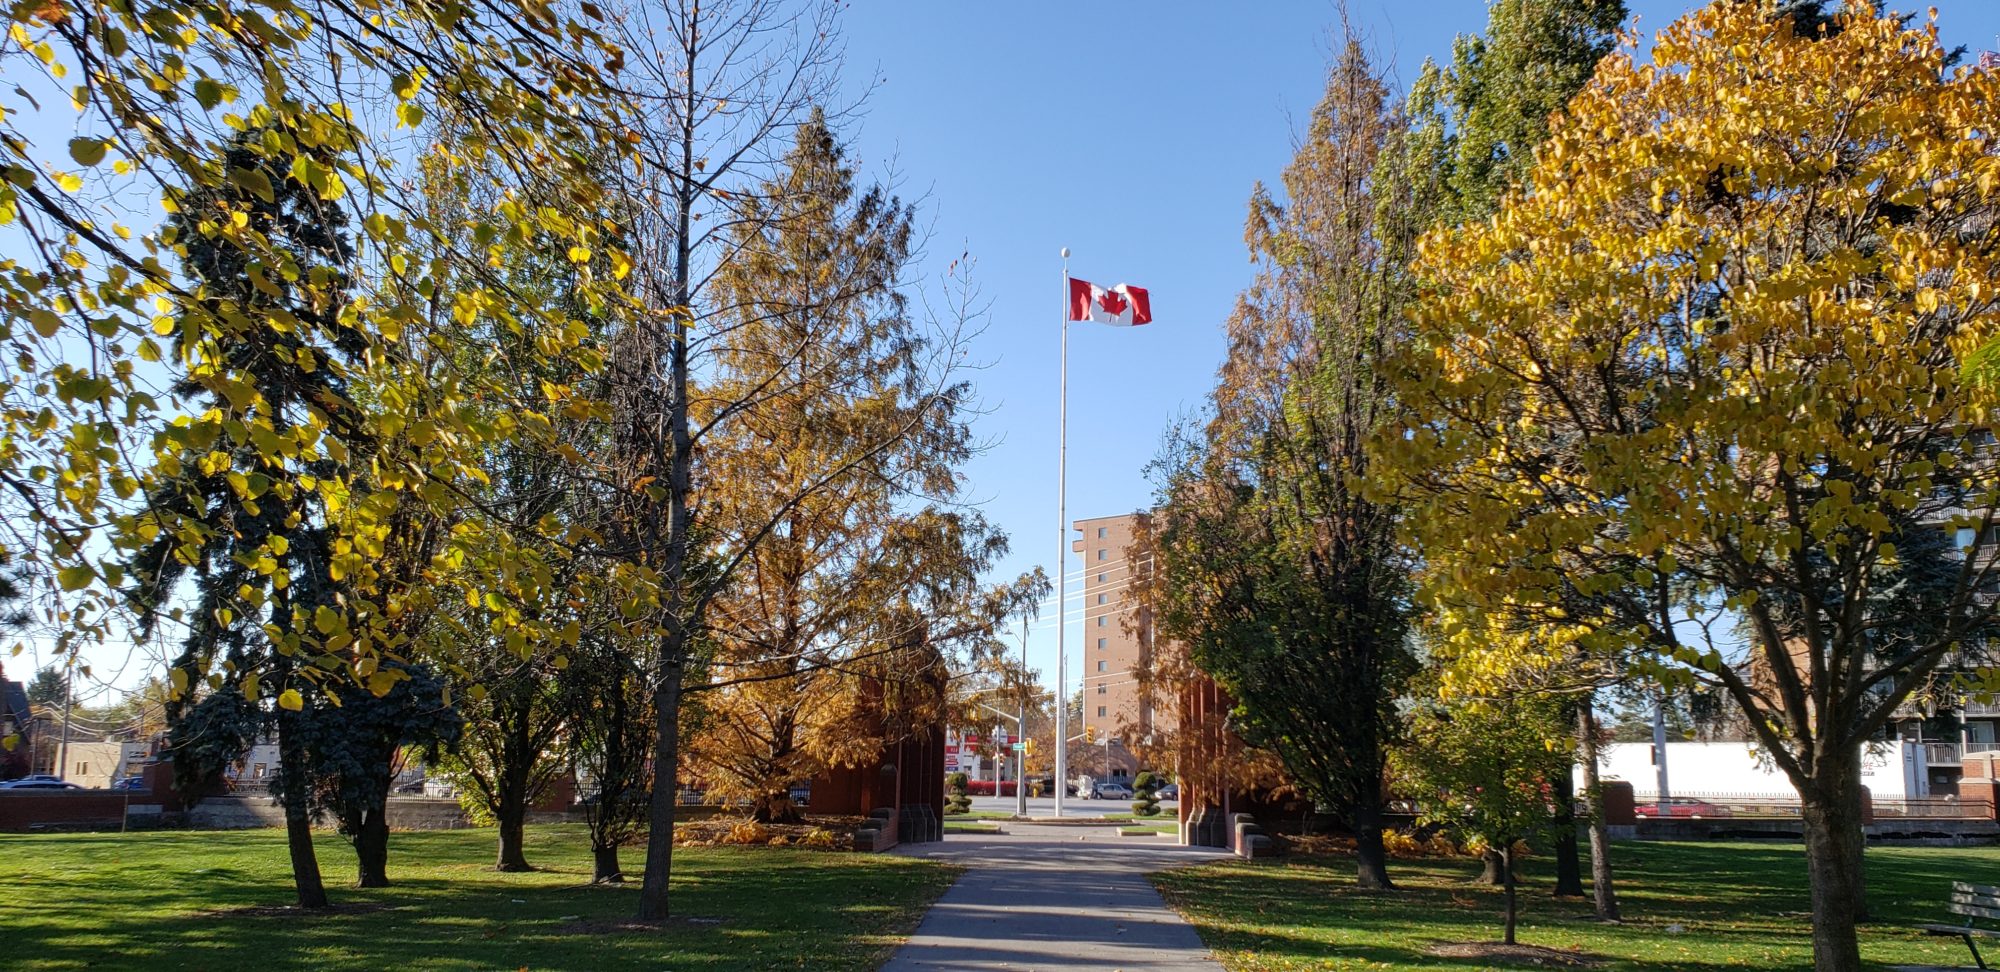 A large Canadian flag stands tall at the southwest entrance of Jackson Park.